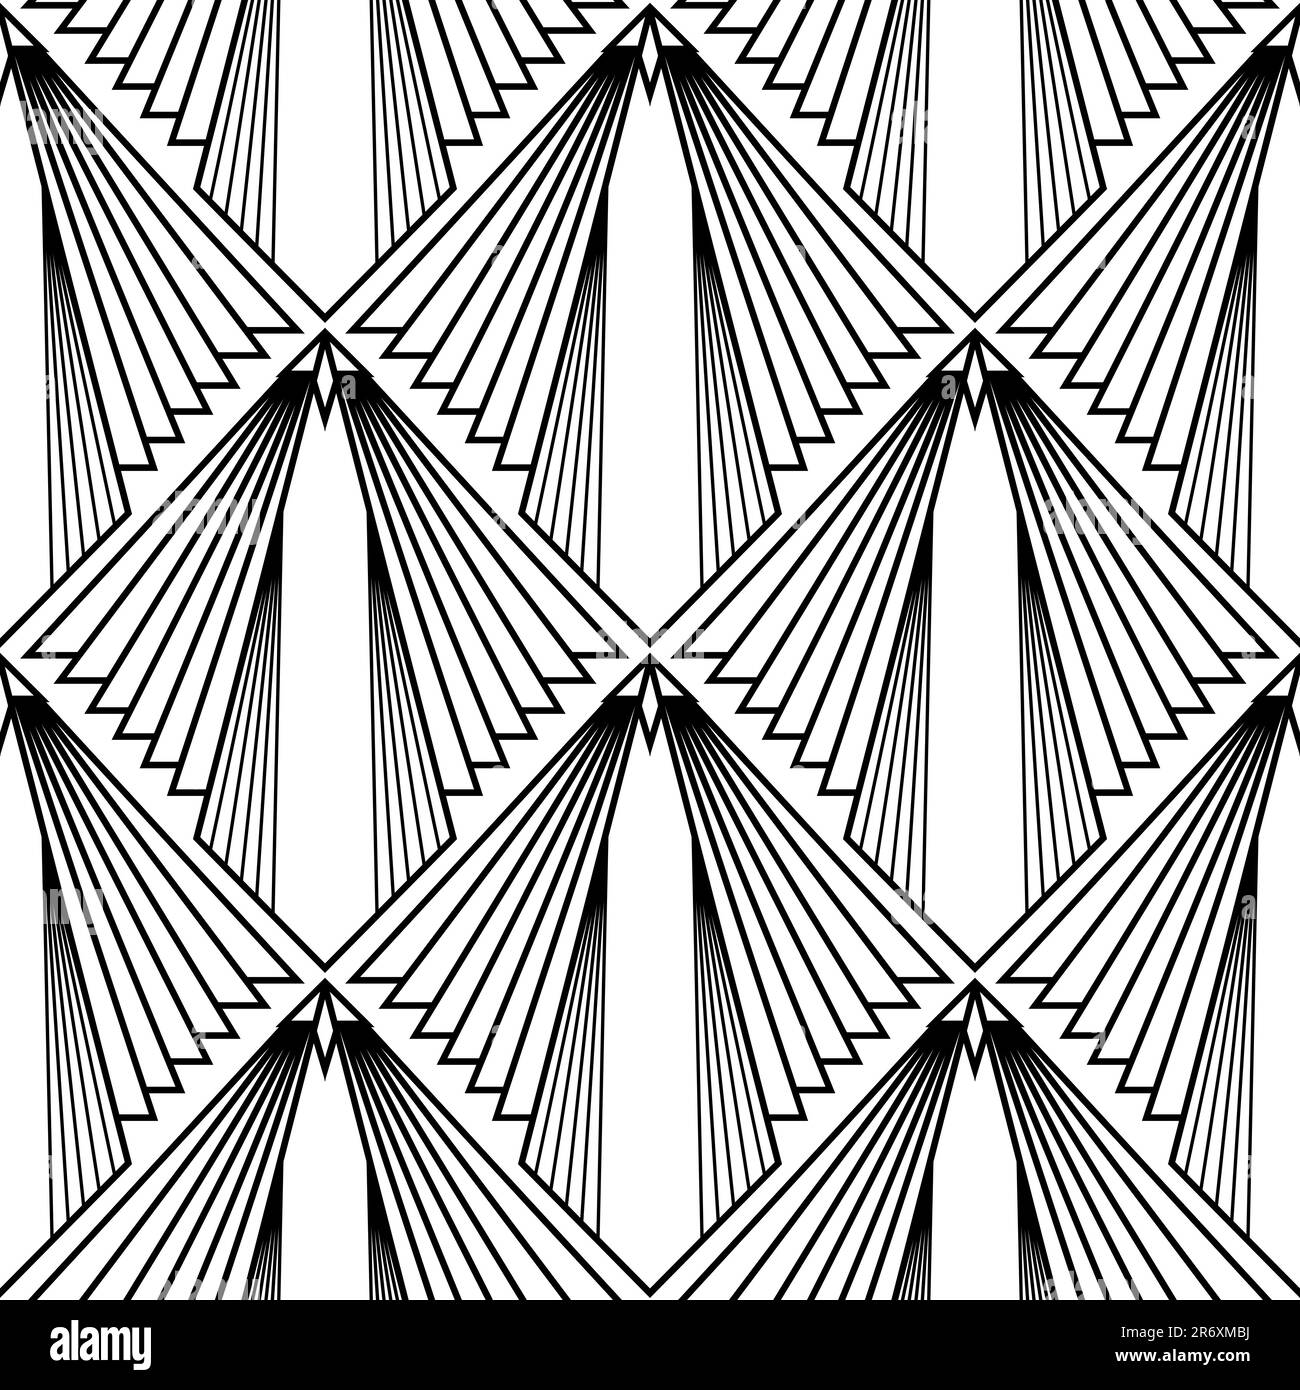 Art Deco Wallpaper. Black and white seamless pattern in roaring ...